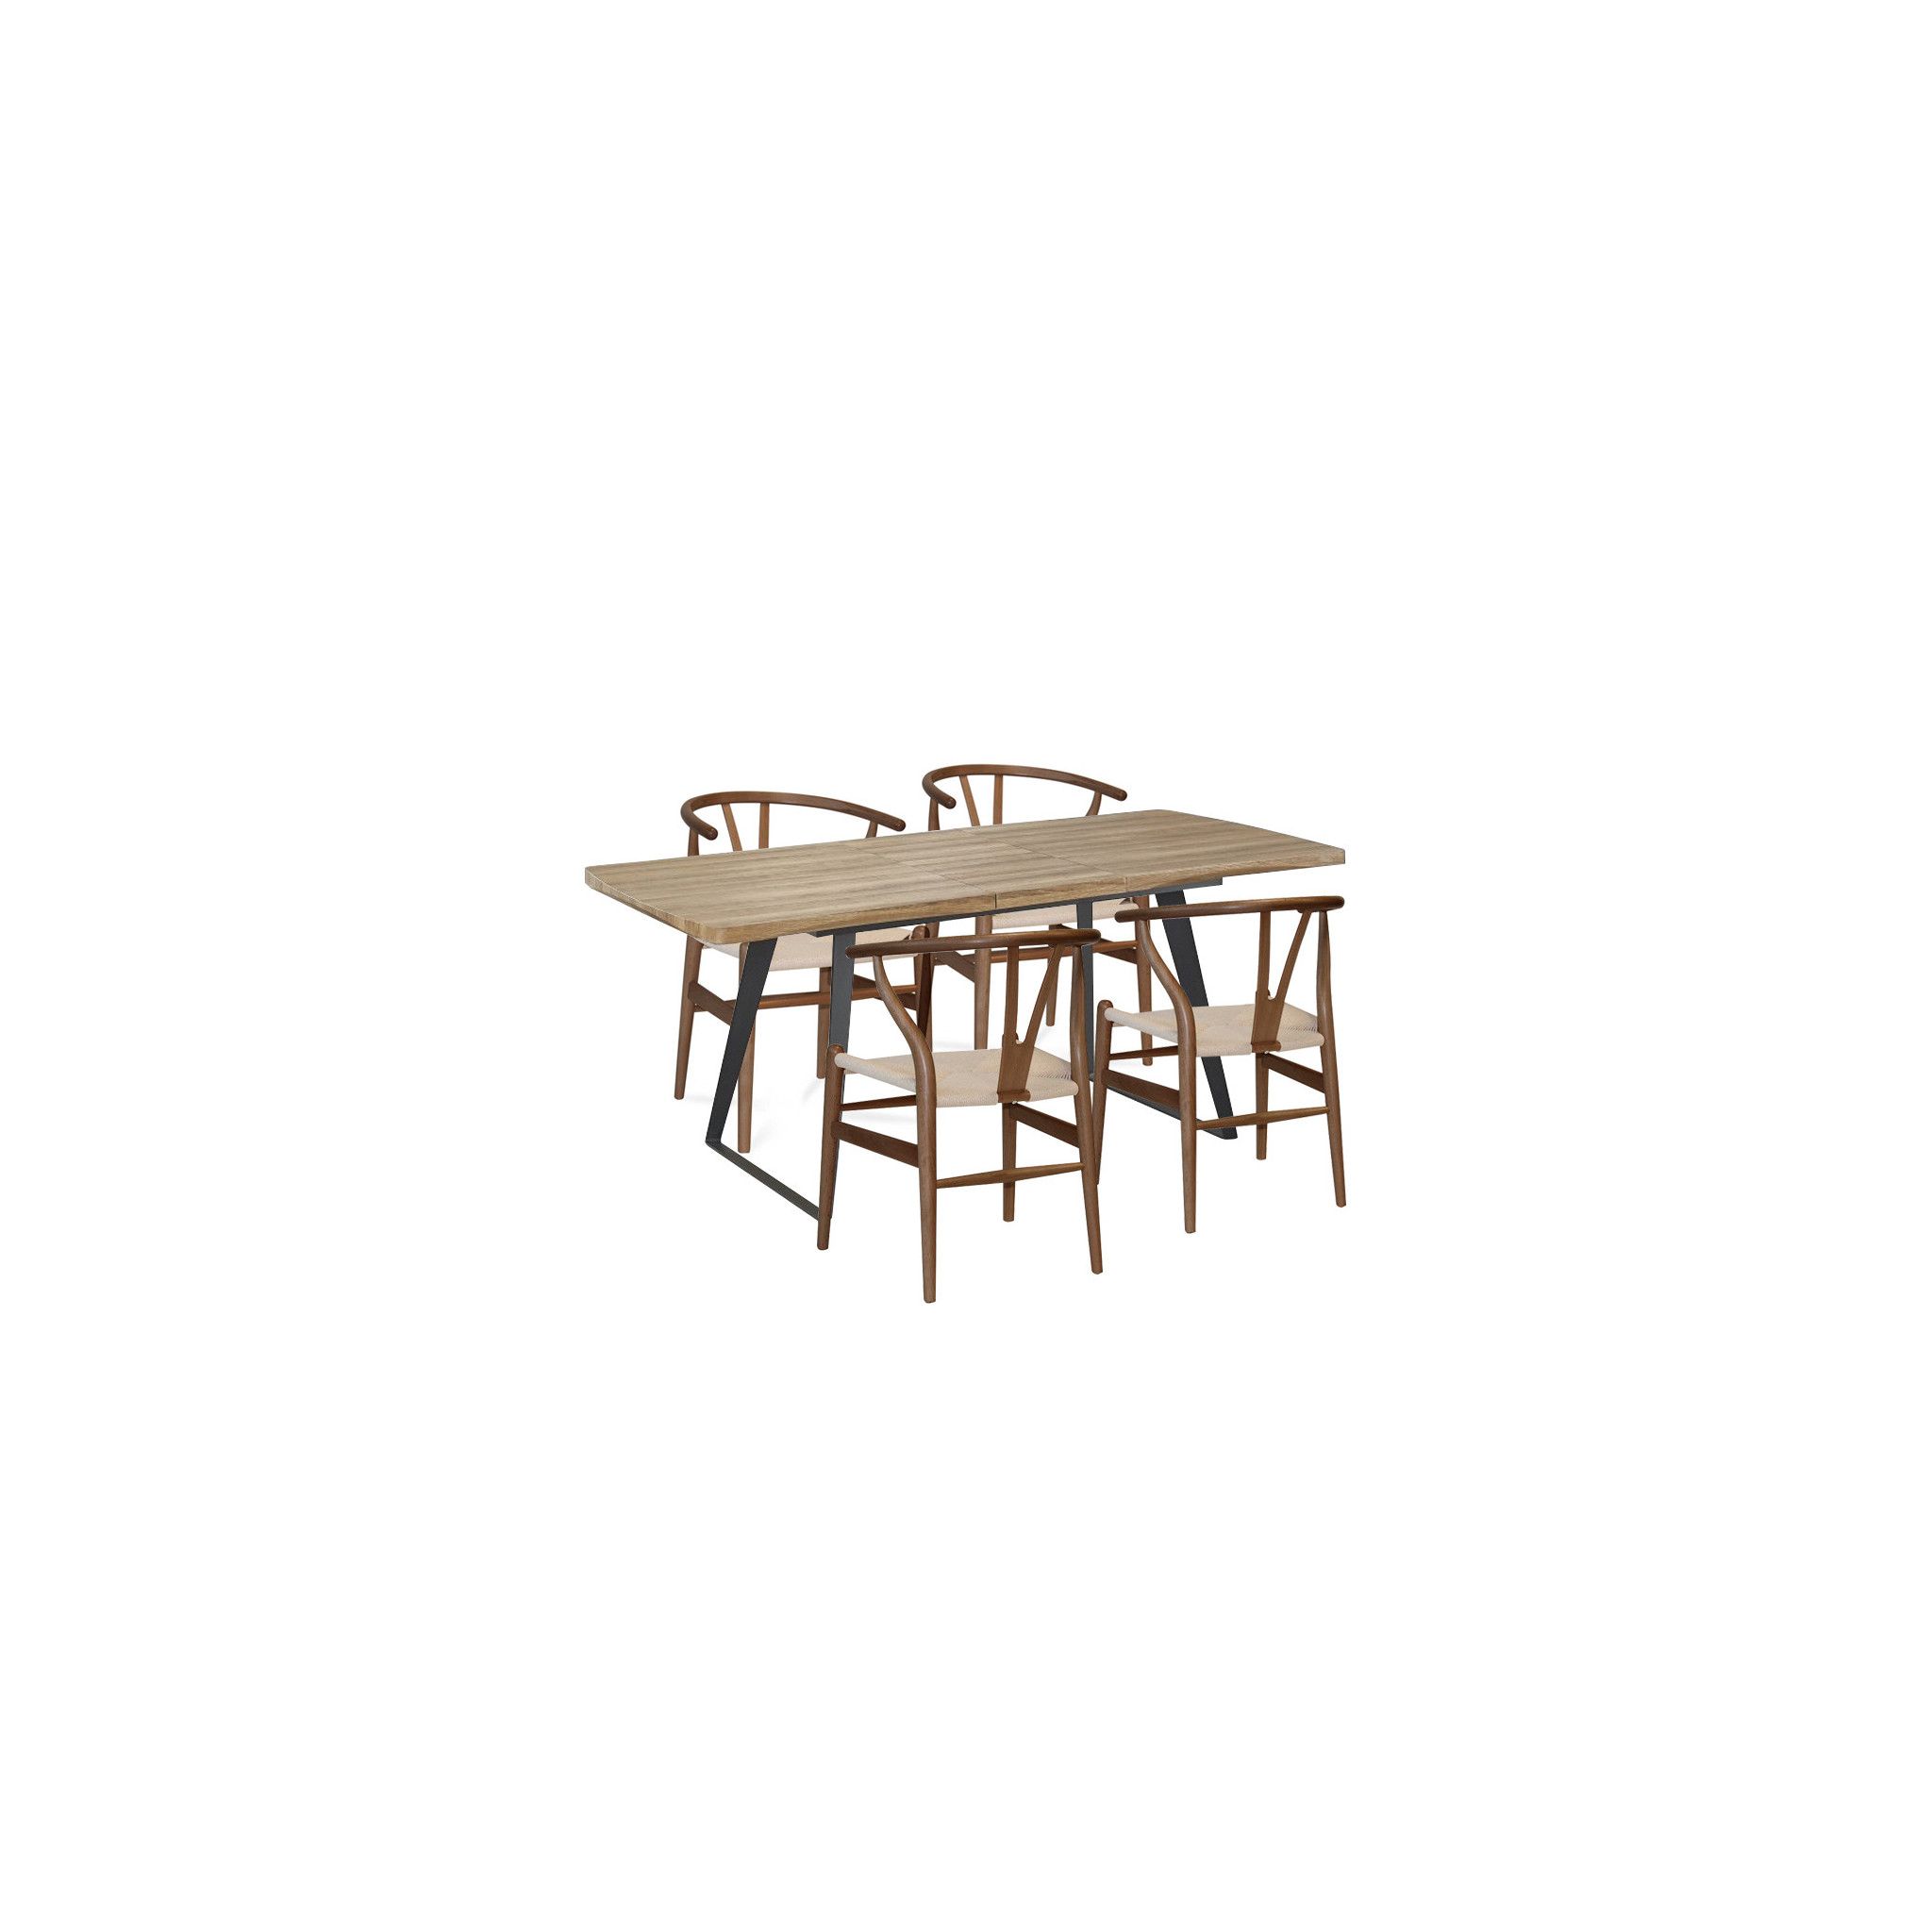 PACK 4 CHAISES WISHGREY MAHOGANY + TABLE BRECKER